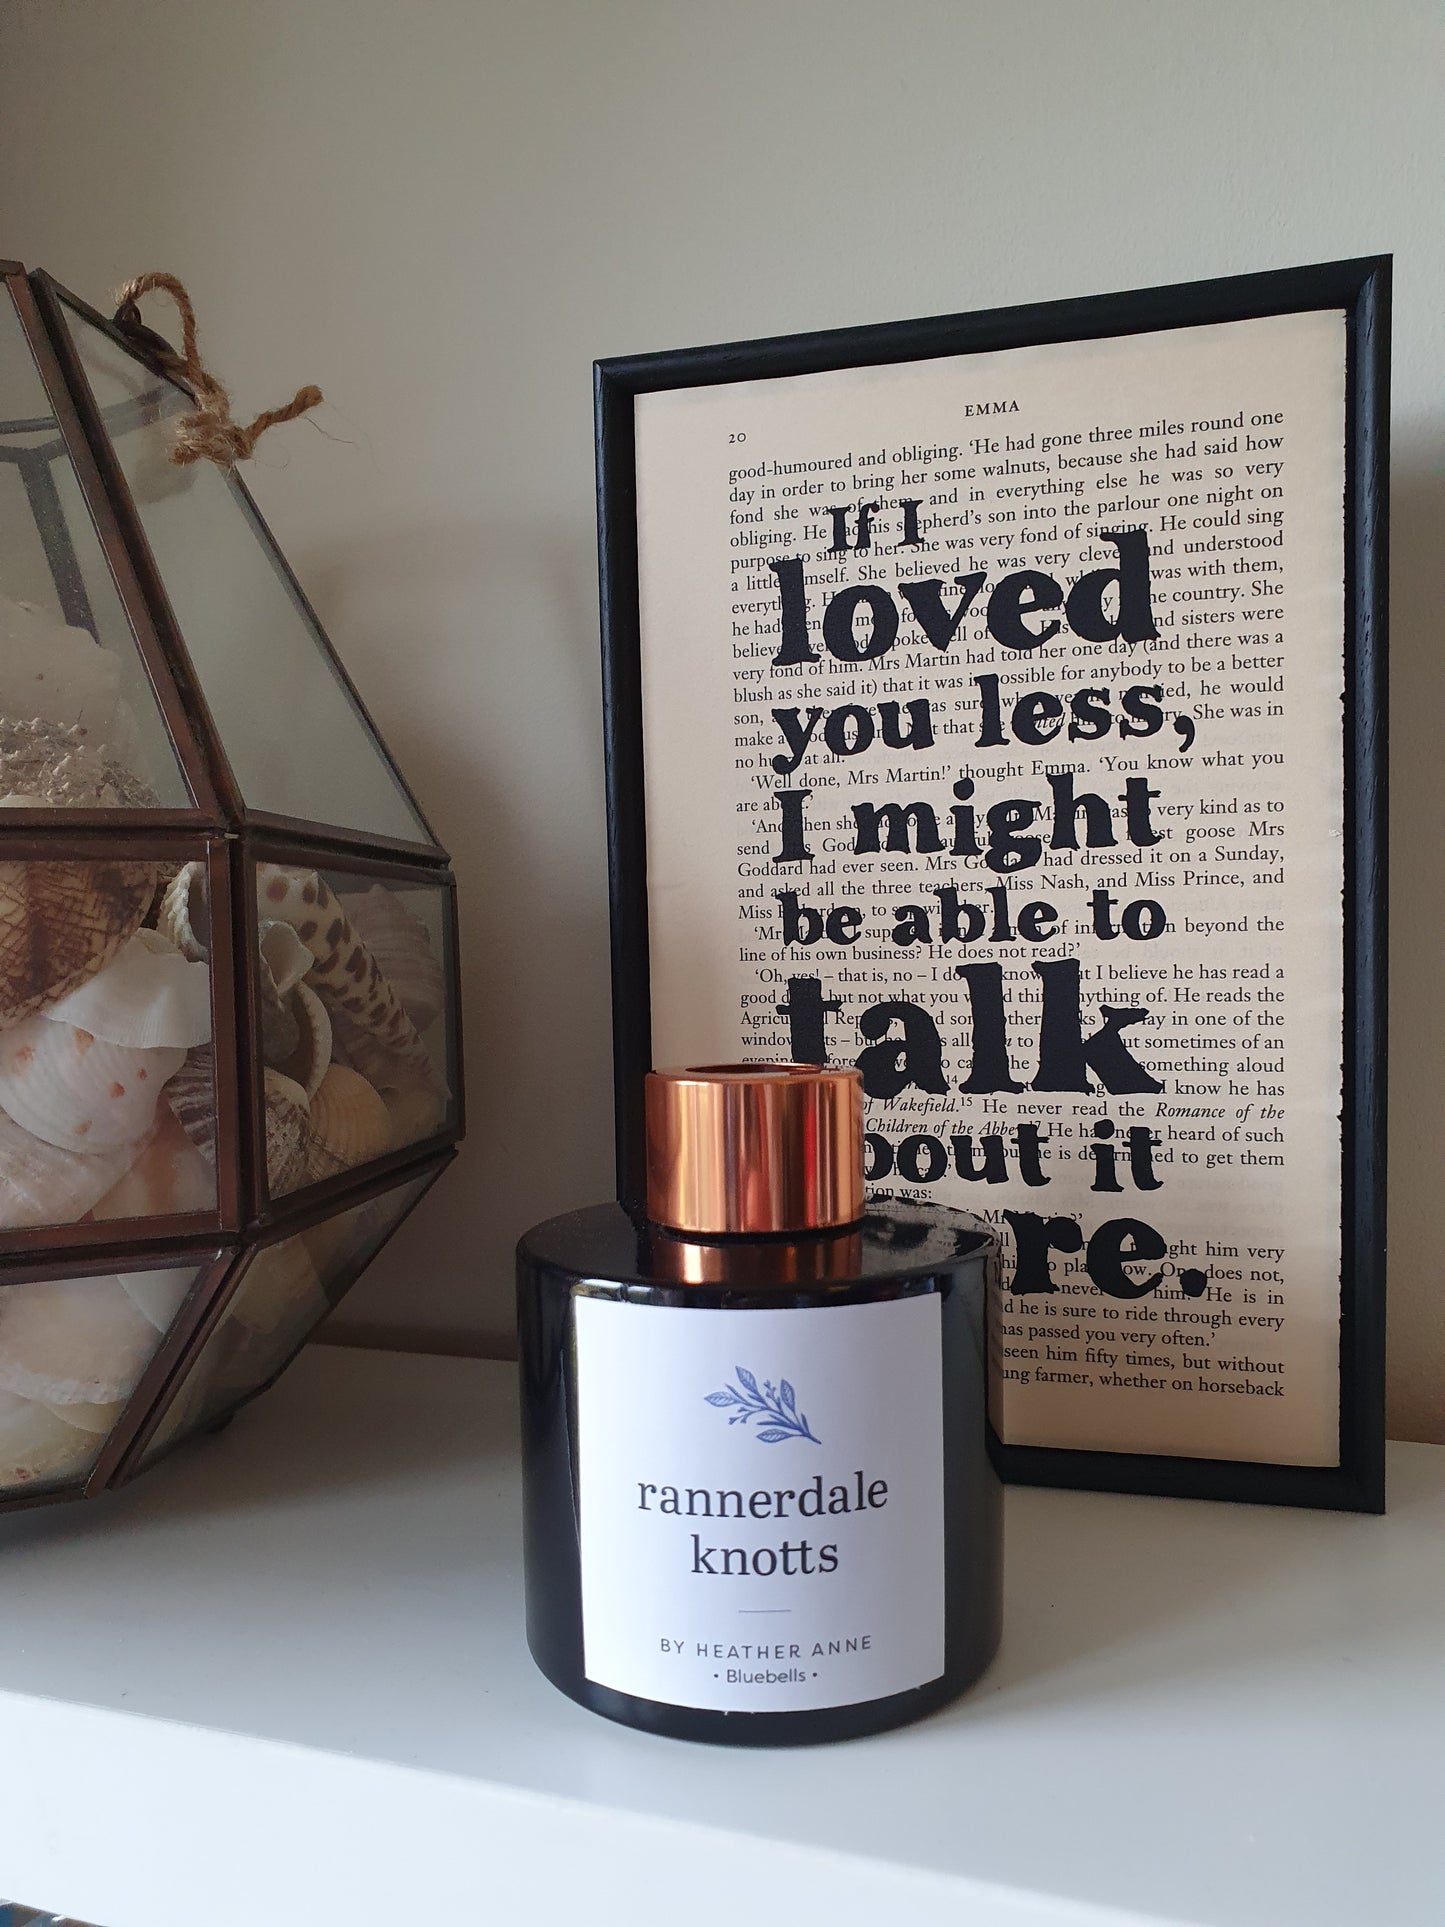 Rannerdale Knotts Bluebell Reed Diffuser